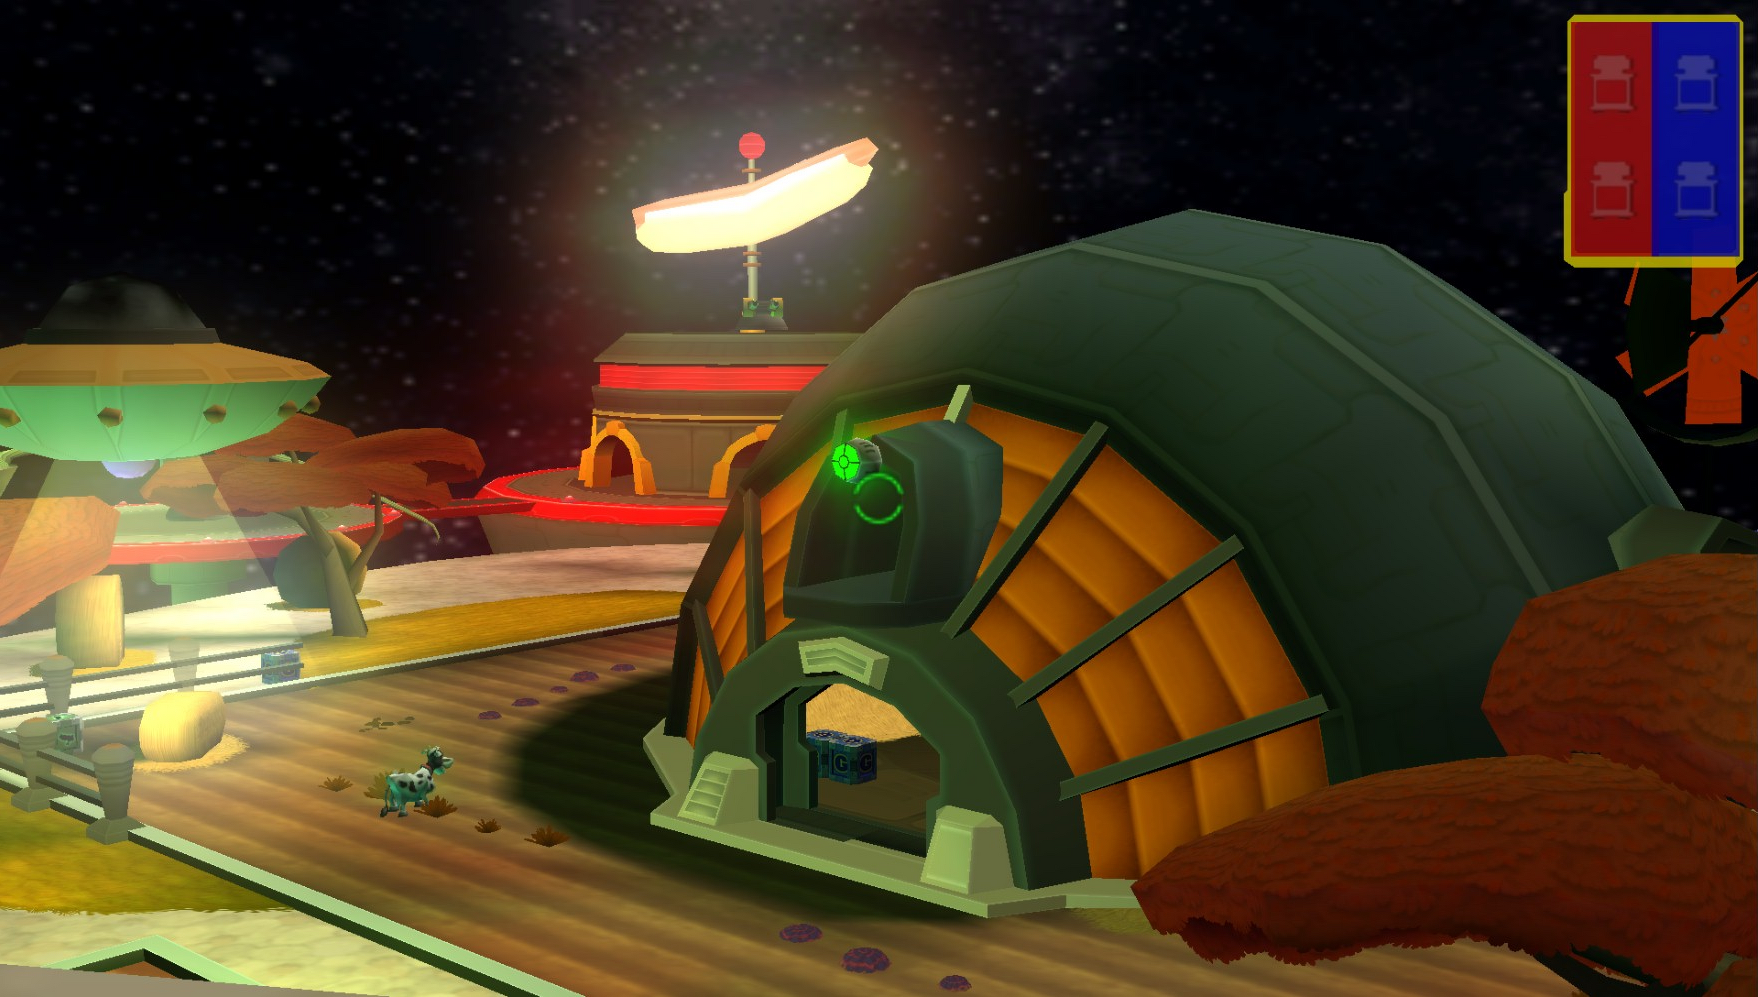 PSP Ratchet & Clank offers four-way multiplayer mode